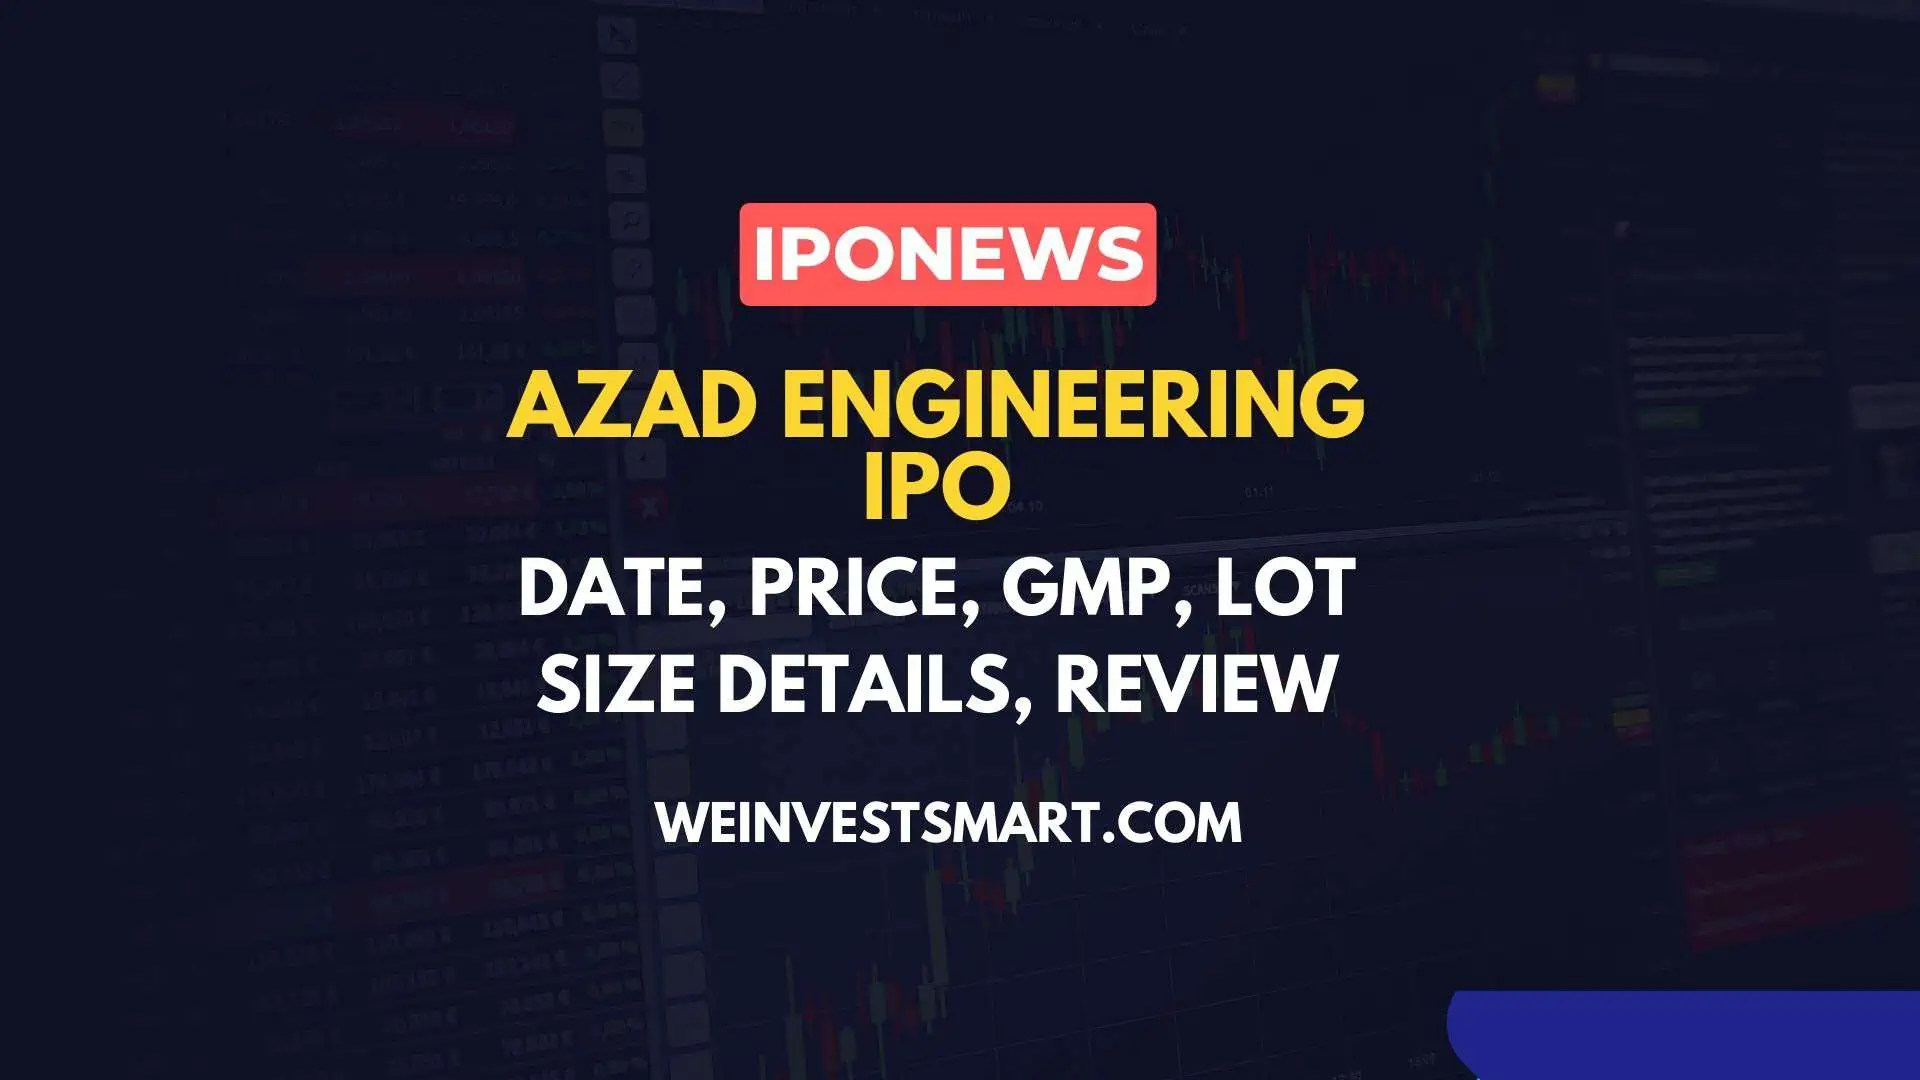 Azad Engineering IPO Date, Price Band, GMP, Lot Size Review, and Details